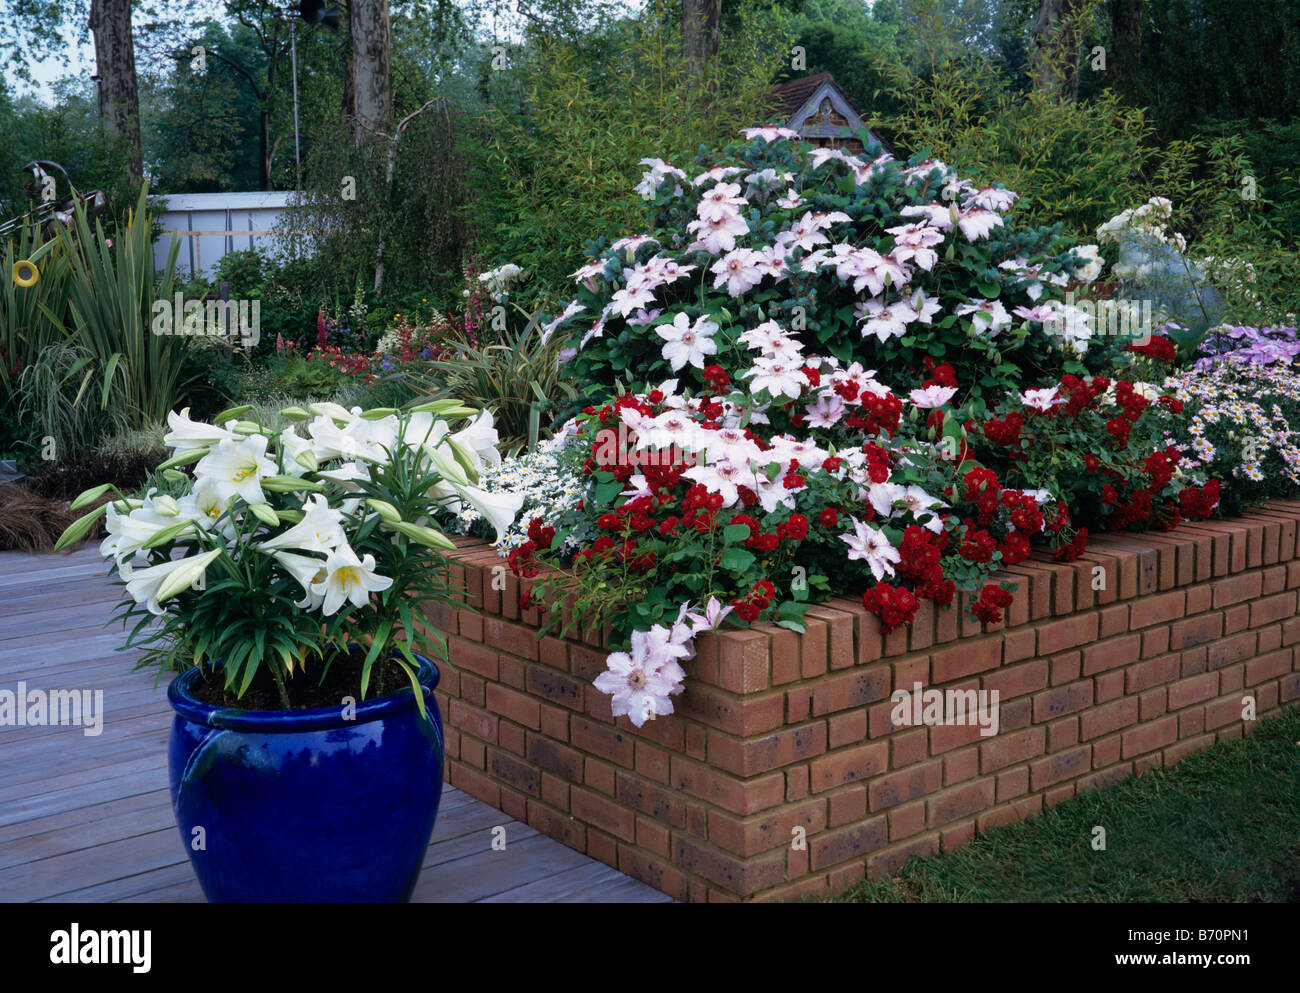 A raised garden border with blue flower container Stock Photo